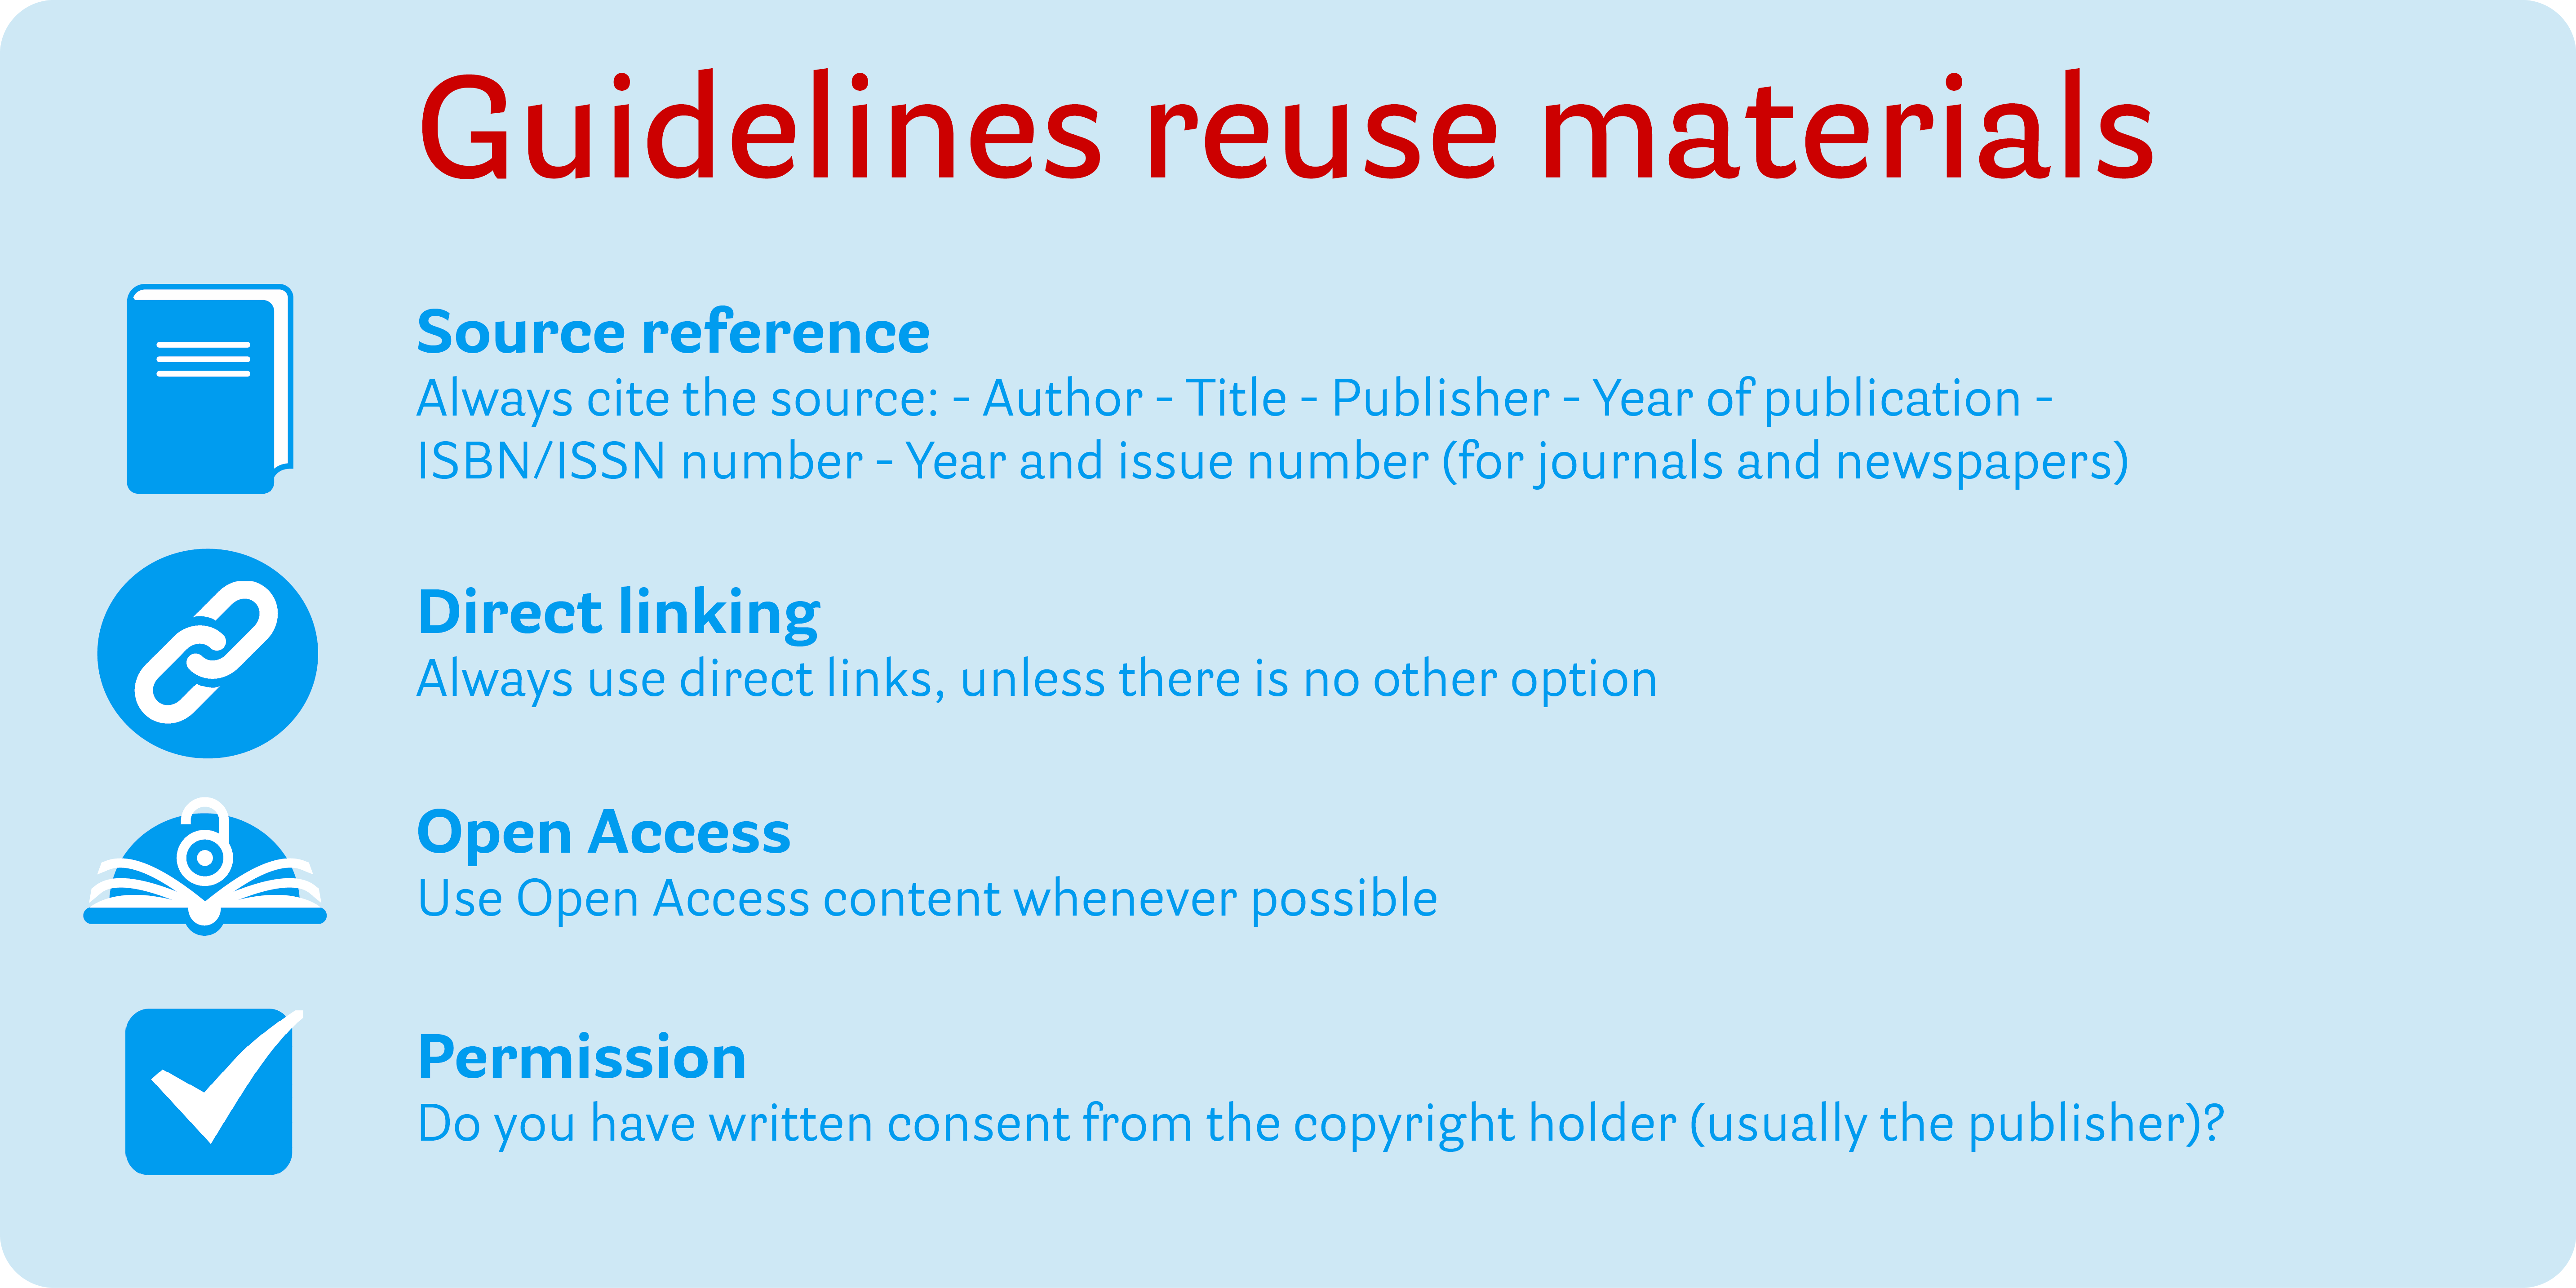 Infographic guidelines reuse material: Infographic vuistregels hergebruik: 1. Source reference (Always cite the source: - Author - Title - Publisher - Year of publication) 2. Direct linking (Always use direct links, unless there is no other option) 3. Open Access (Use Open Access content whenever possible) 4. Permission (Do you have (written) consent from the copyright holder (usually the publisher?)